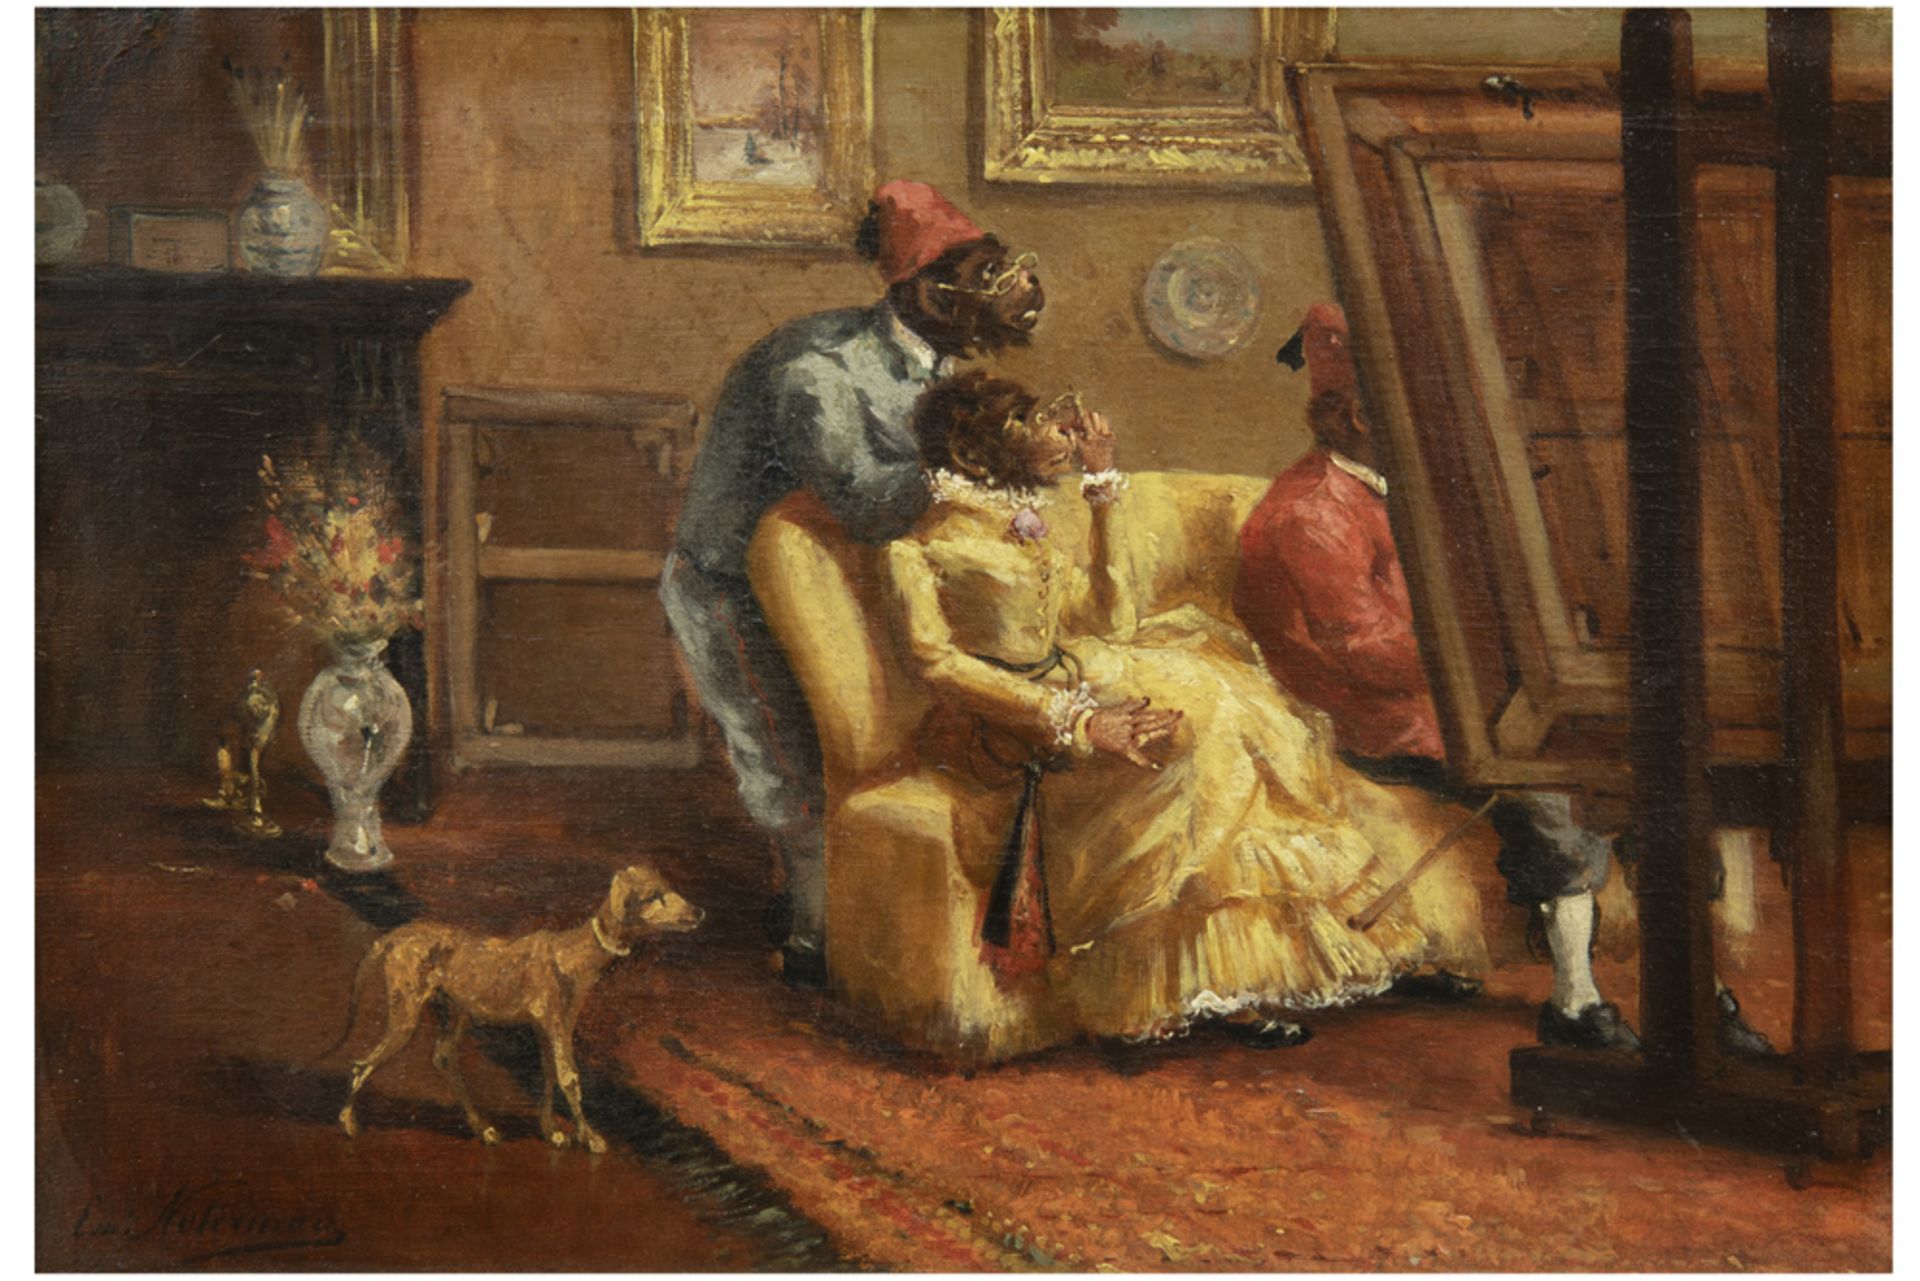 19th Cent. Belgian oil on canvas with a typical satirical theme with monkeys - signed Emmanuel